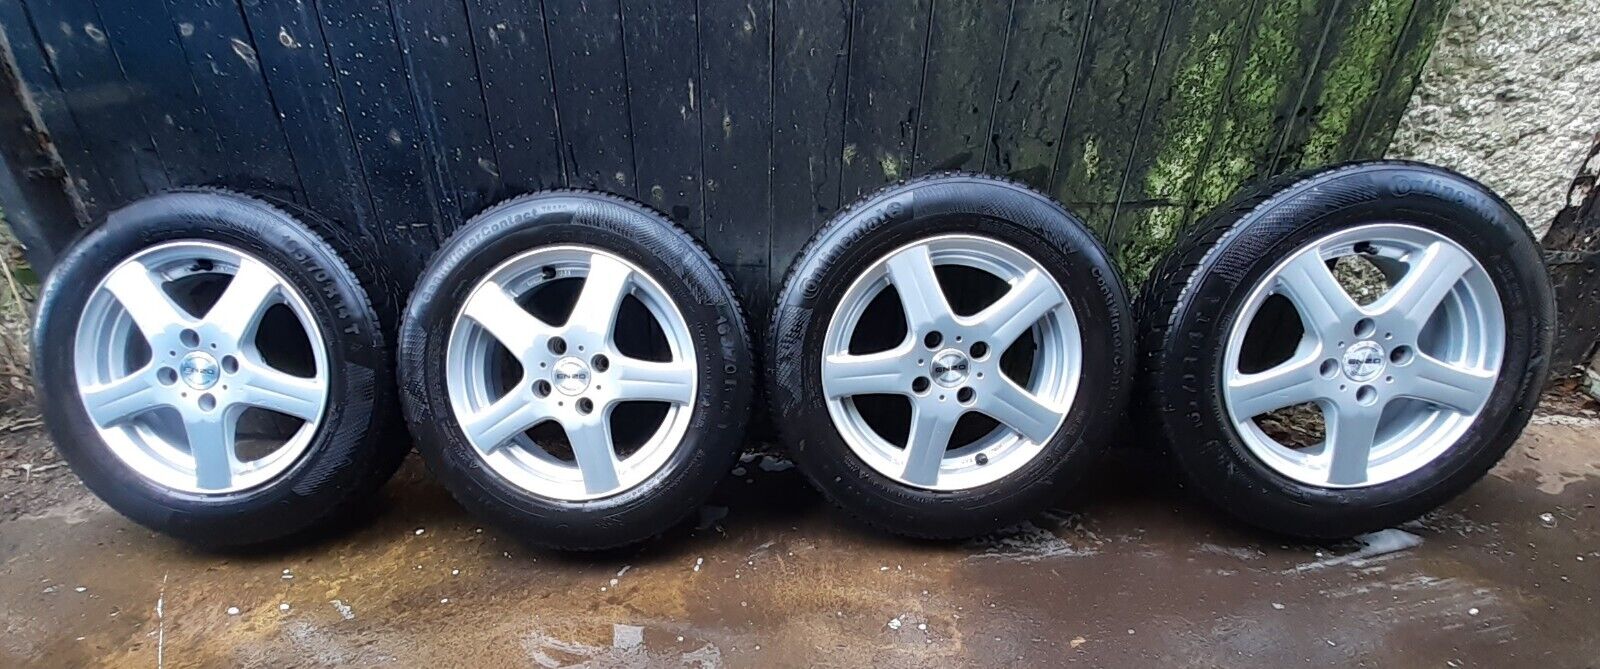 Enzo 14 inch 5 spoke alloy wheels Continental winter snow tyres good condition